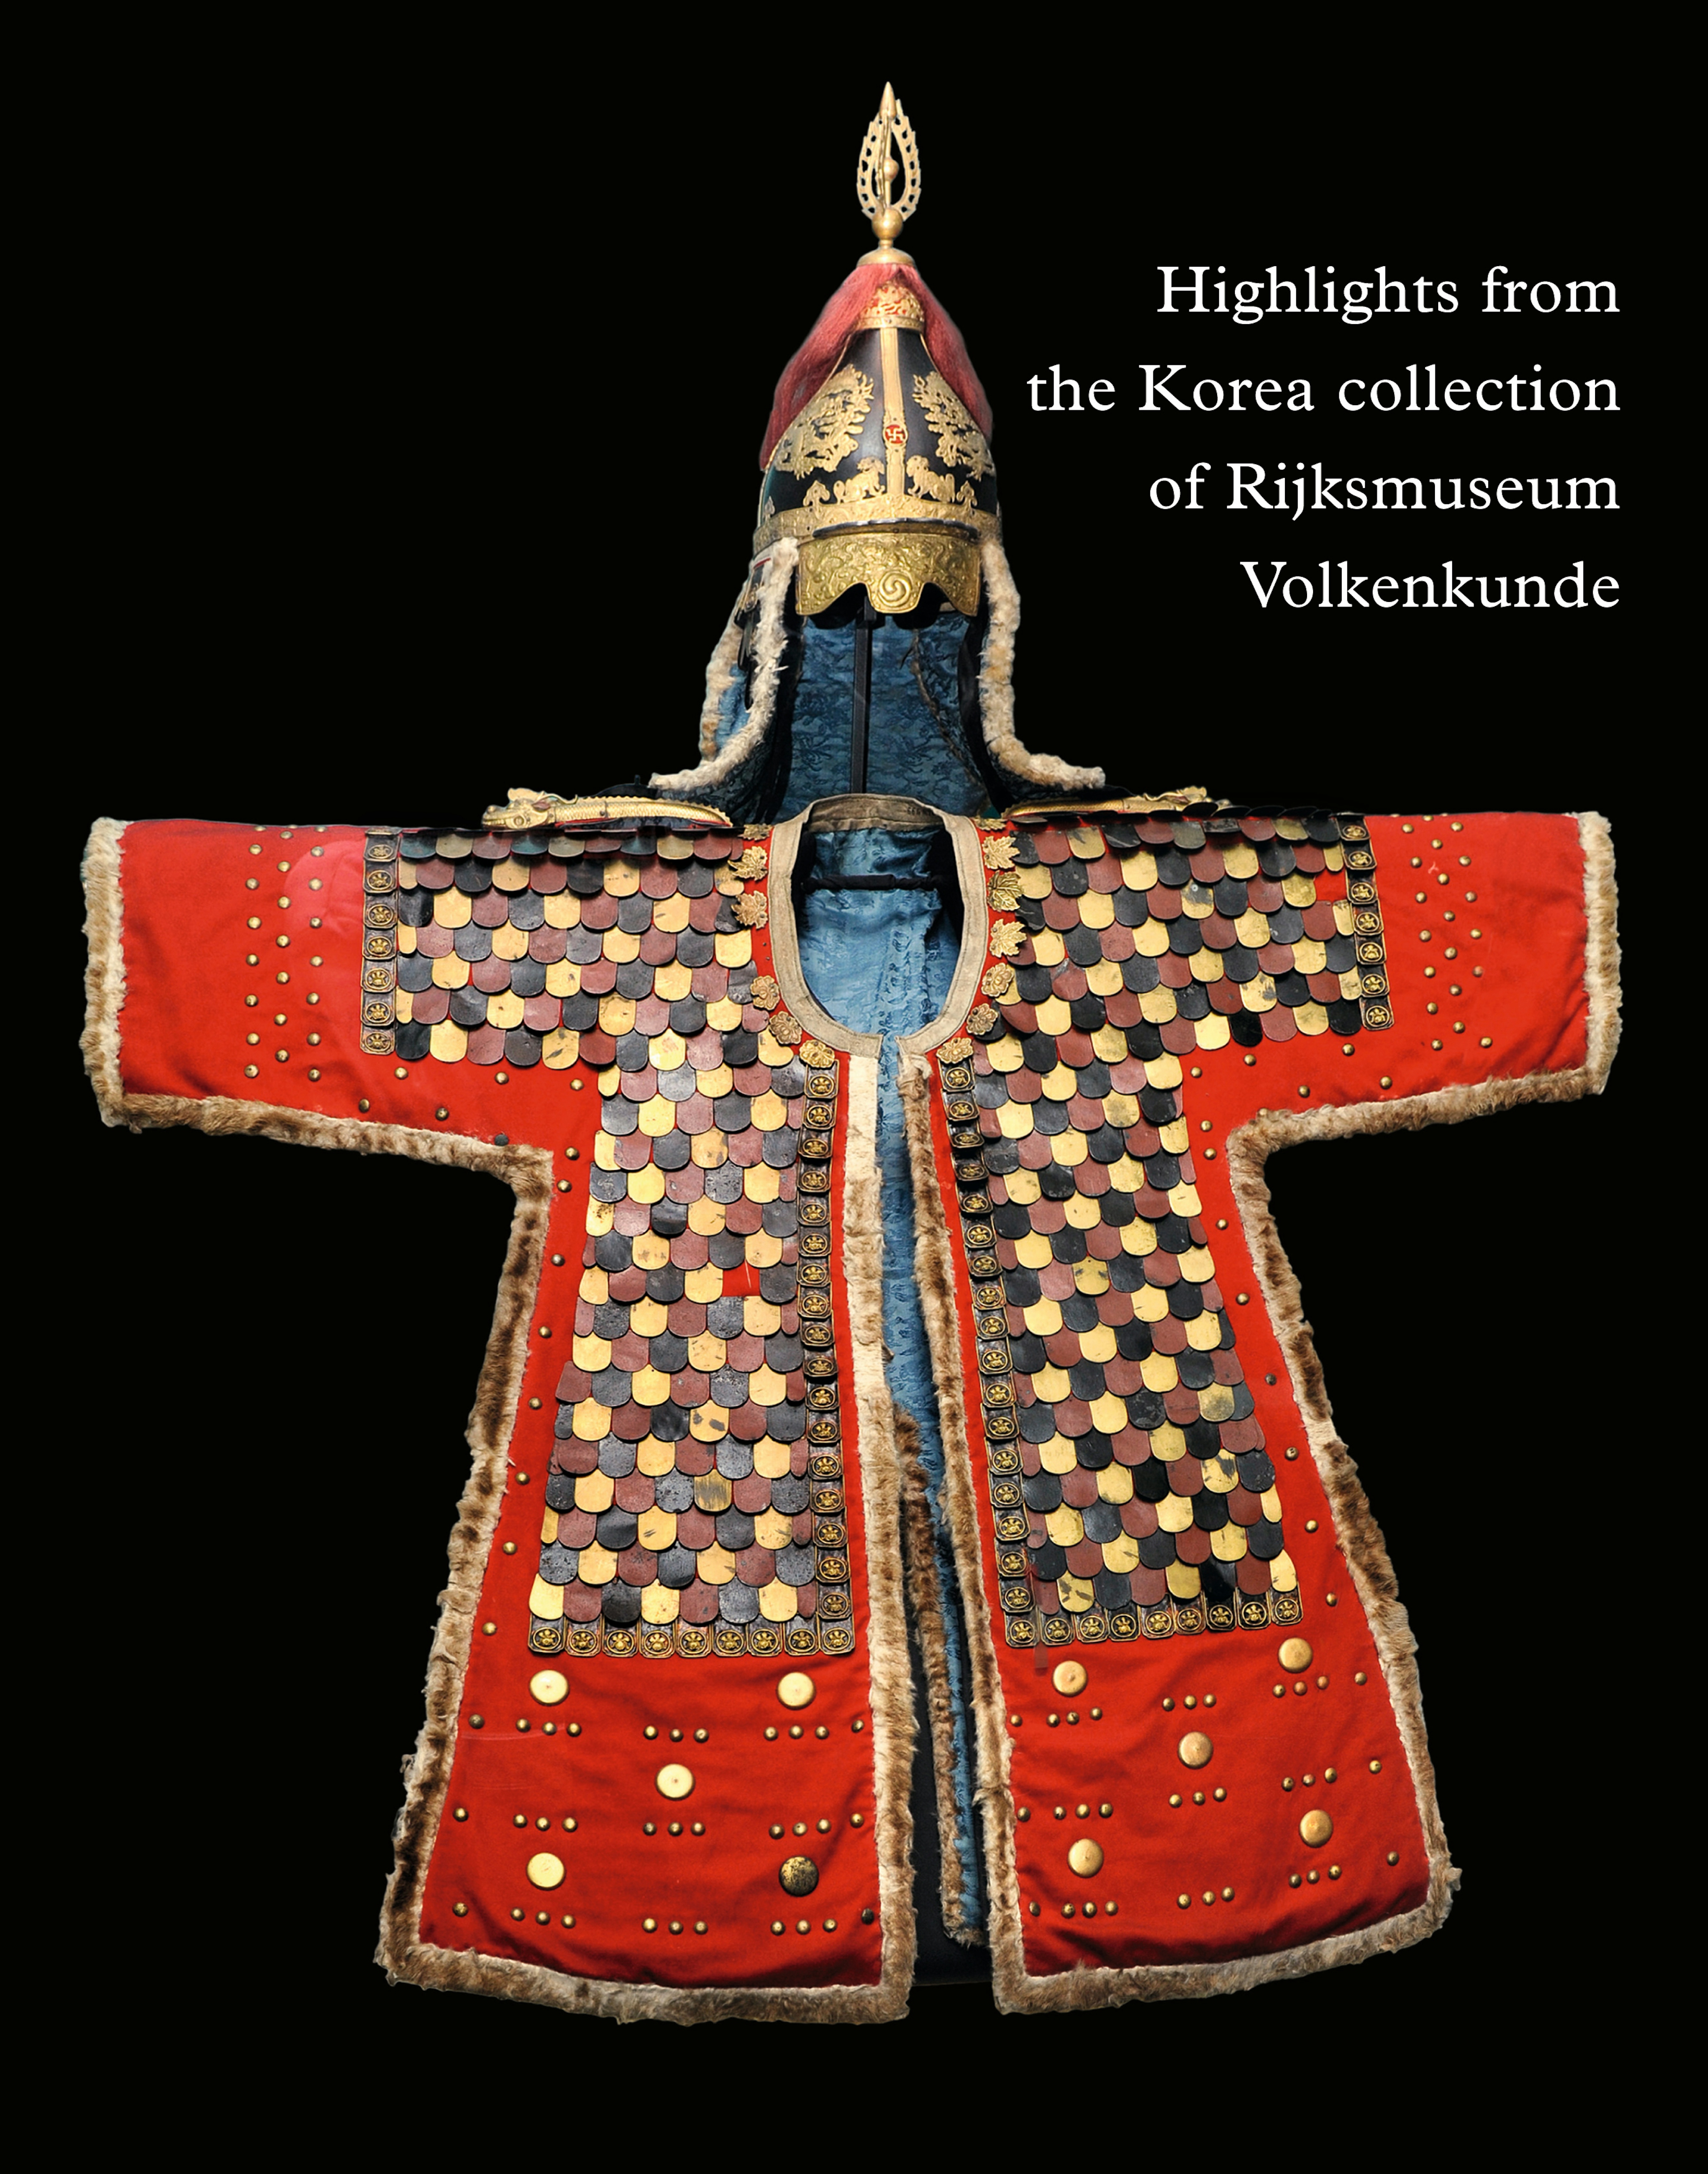 Highlights from the Korea Collection of Rijksmuseum Volkenkunde